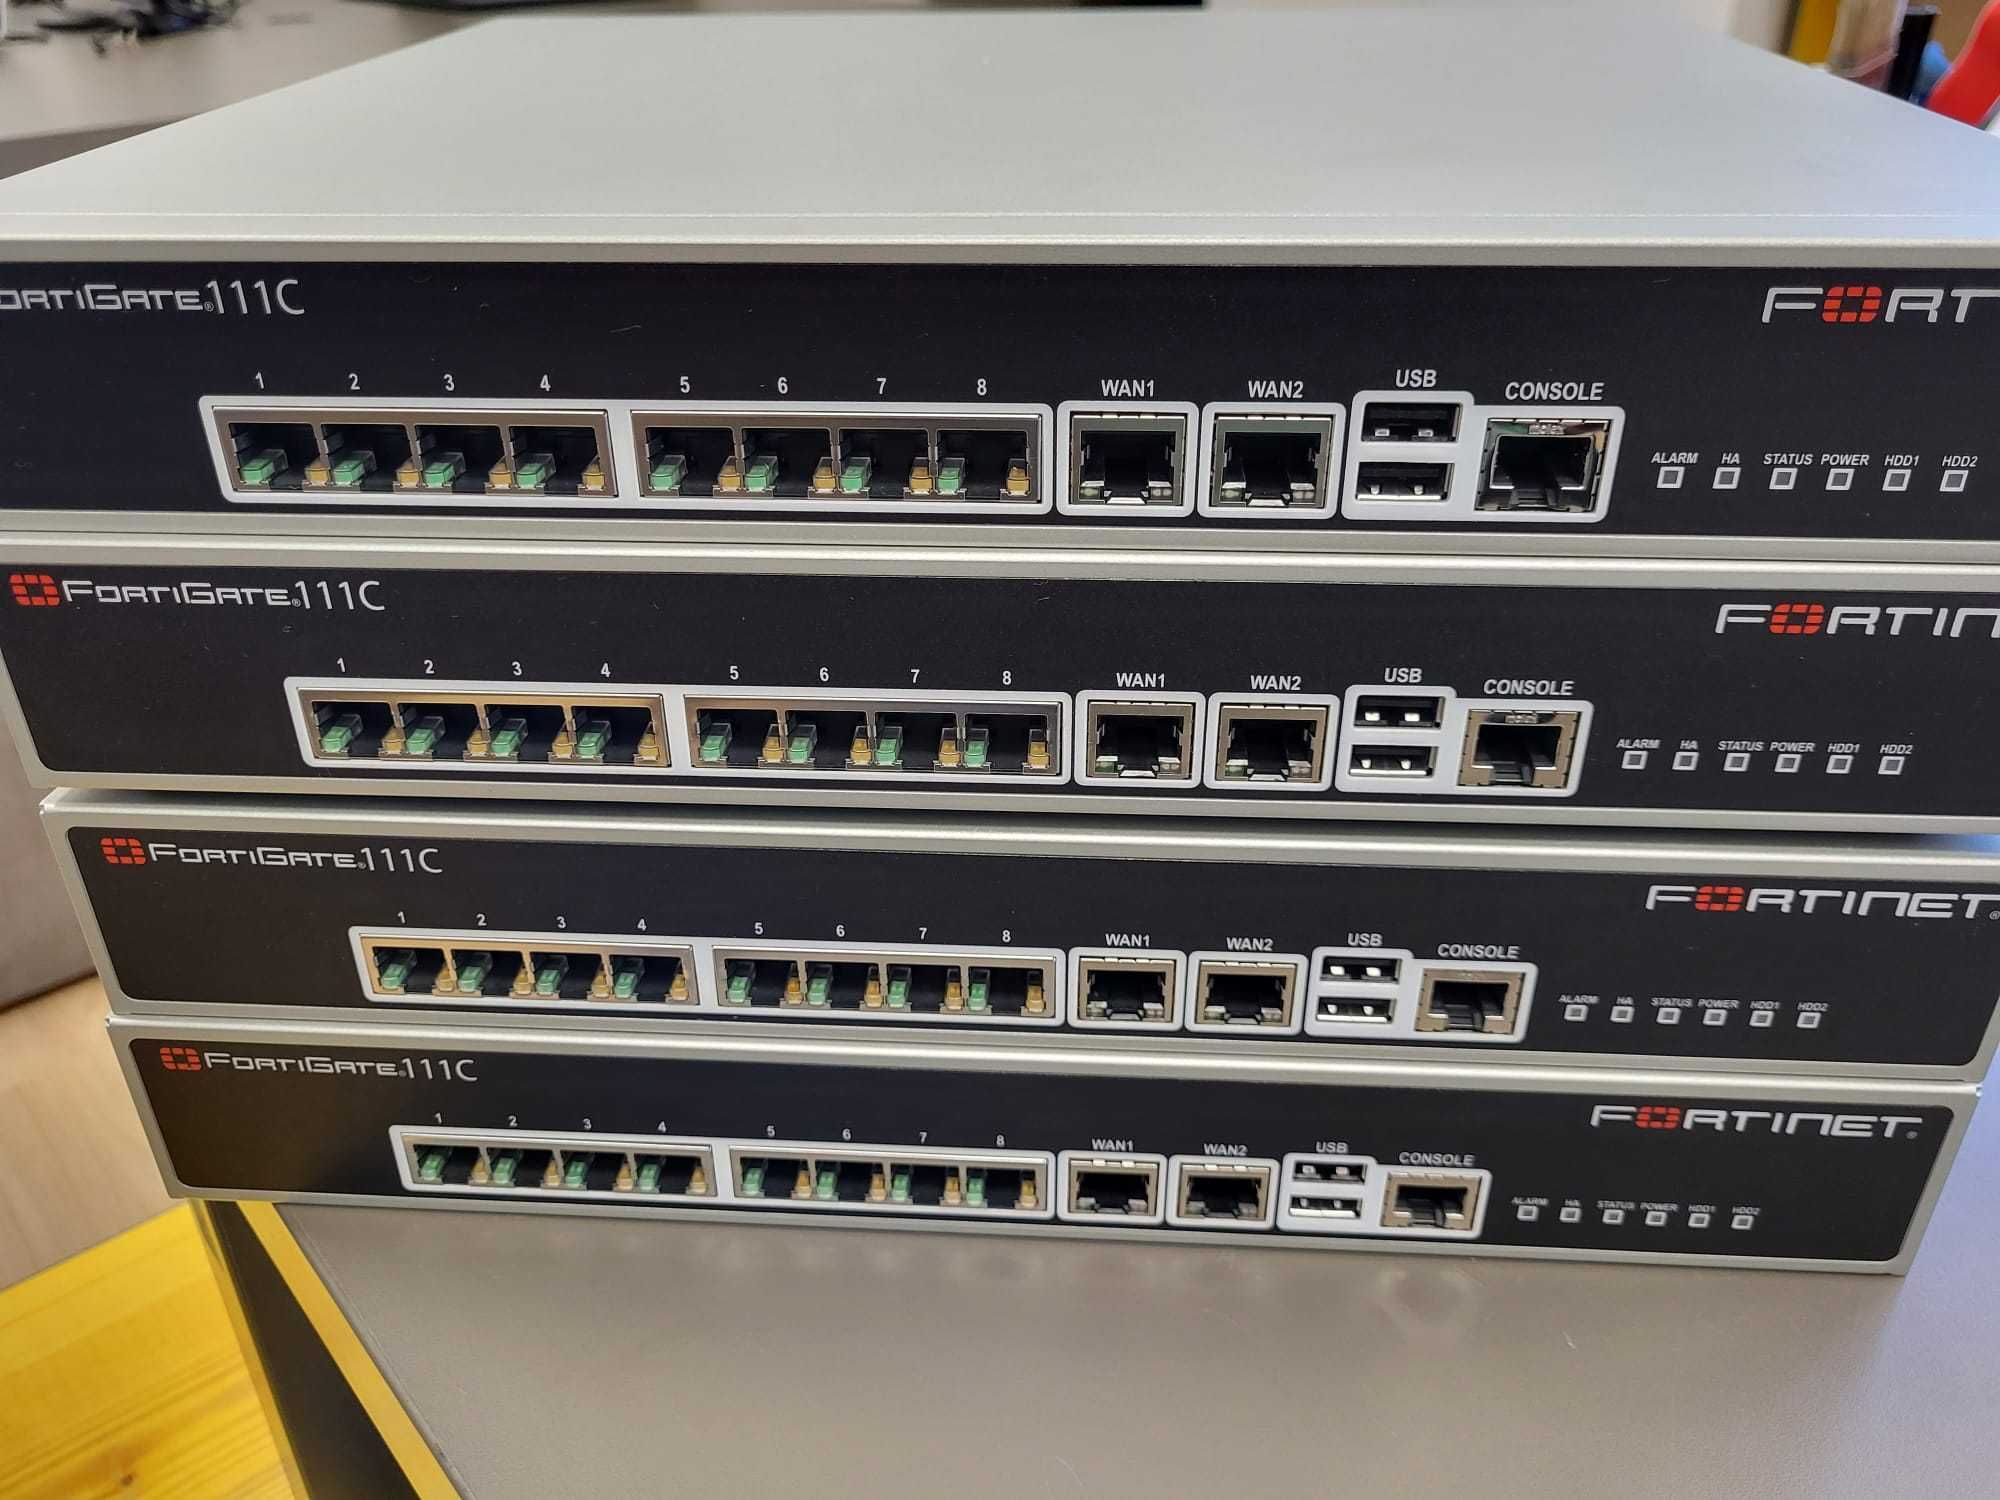 Router / Firewall FortiGate 111C 1Gb/s Enterprise Security System